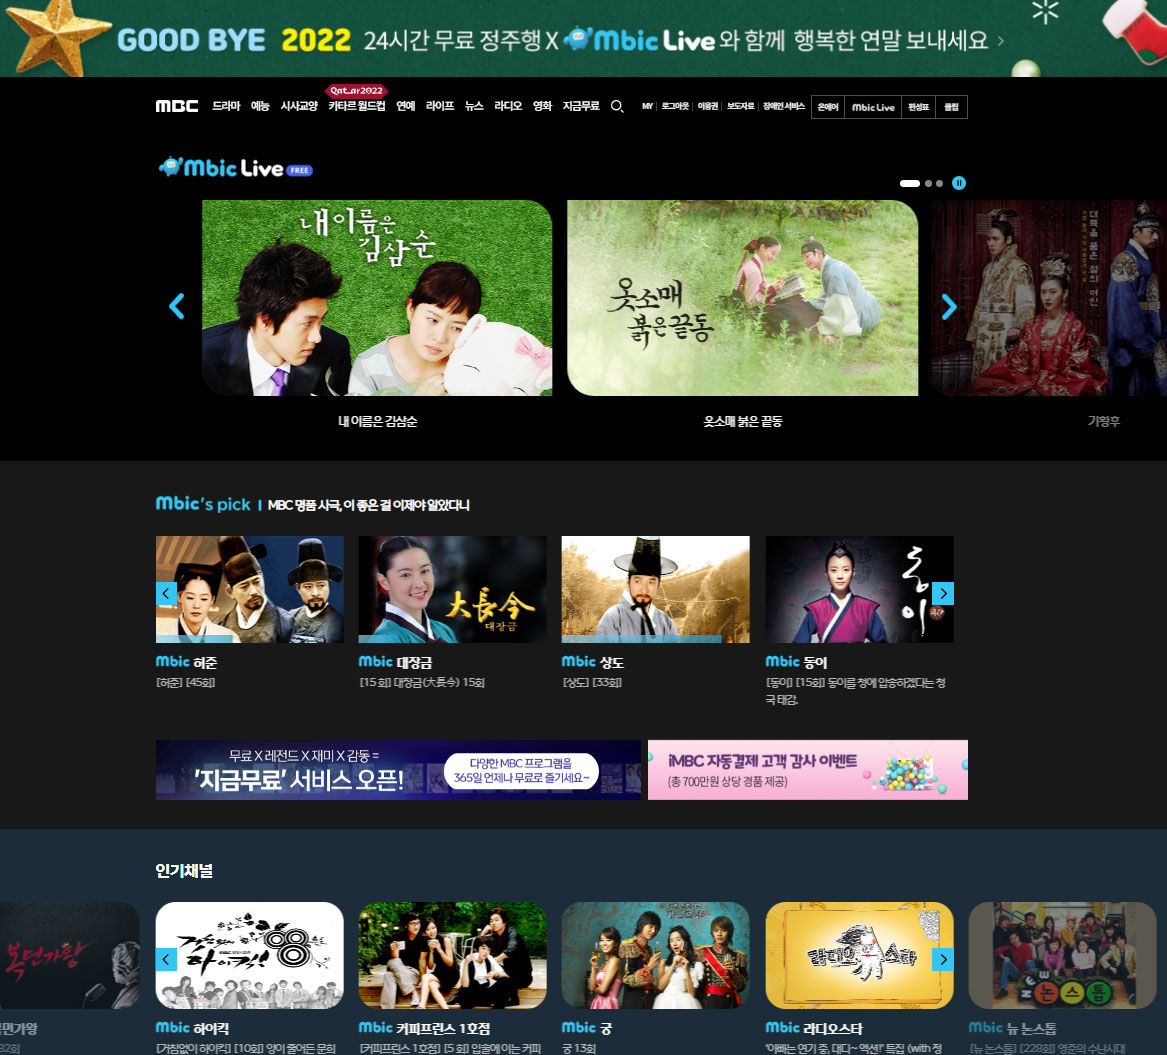 Image shows MBC's dramas and unscripted shows available via Mbic Live (MBC)